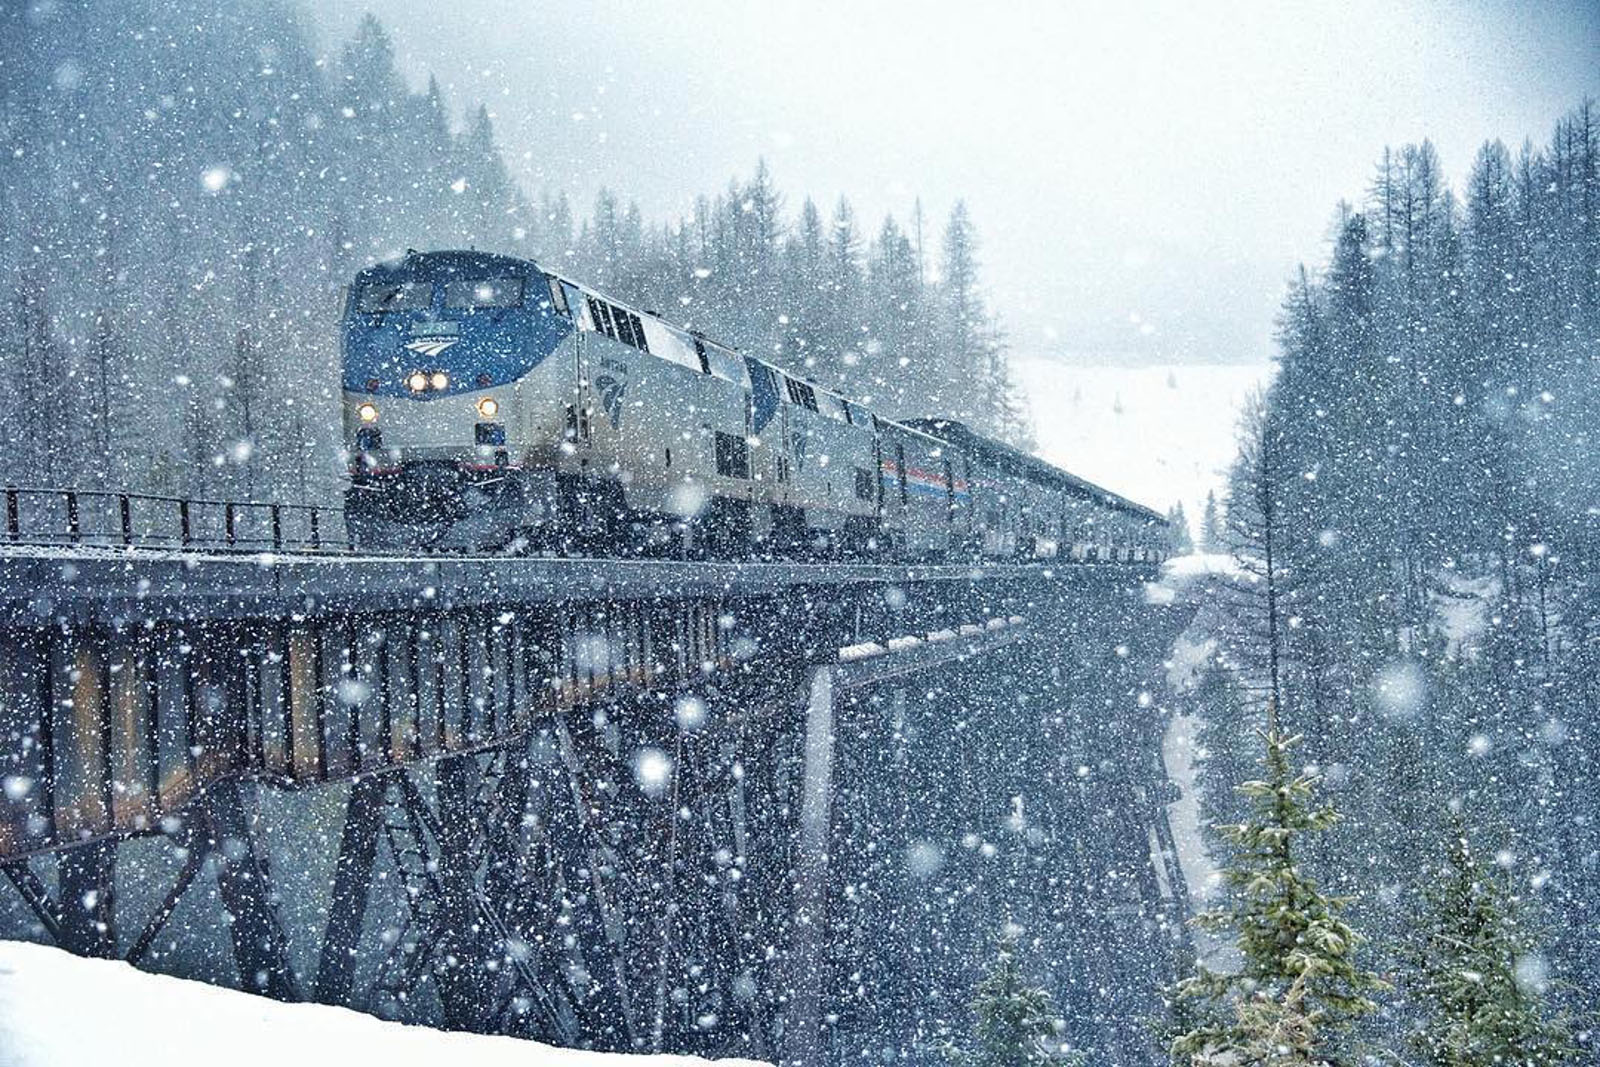 #AmtrakHoliday Social Media Photo Contest Terms & Conditions